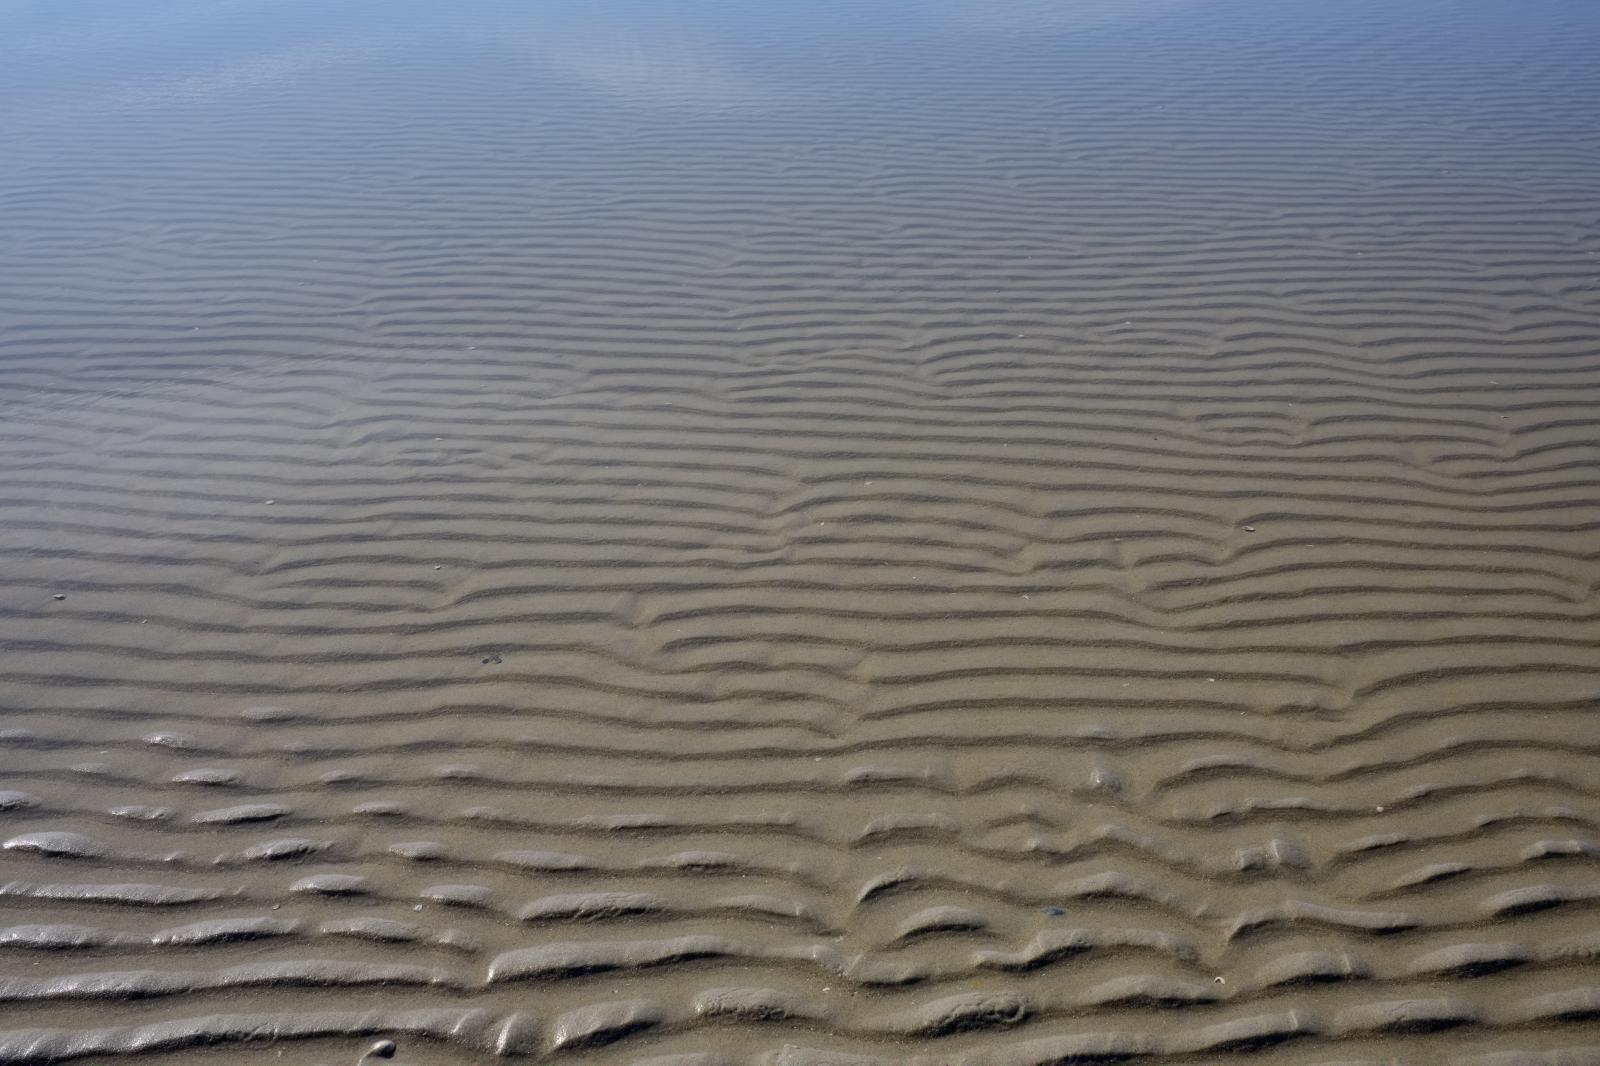 Beach Patterns | Buy this image